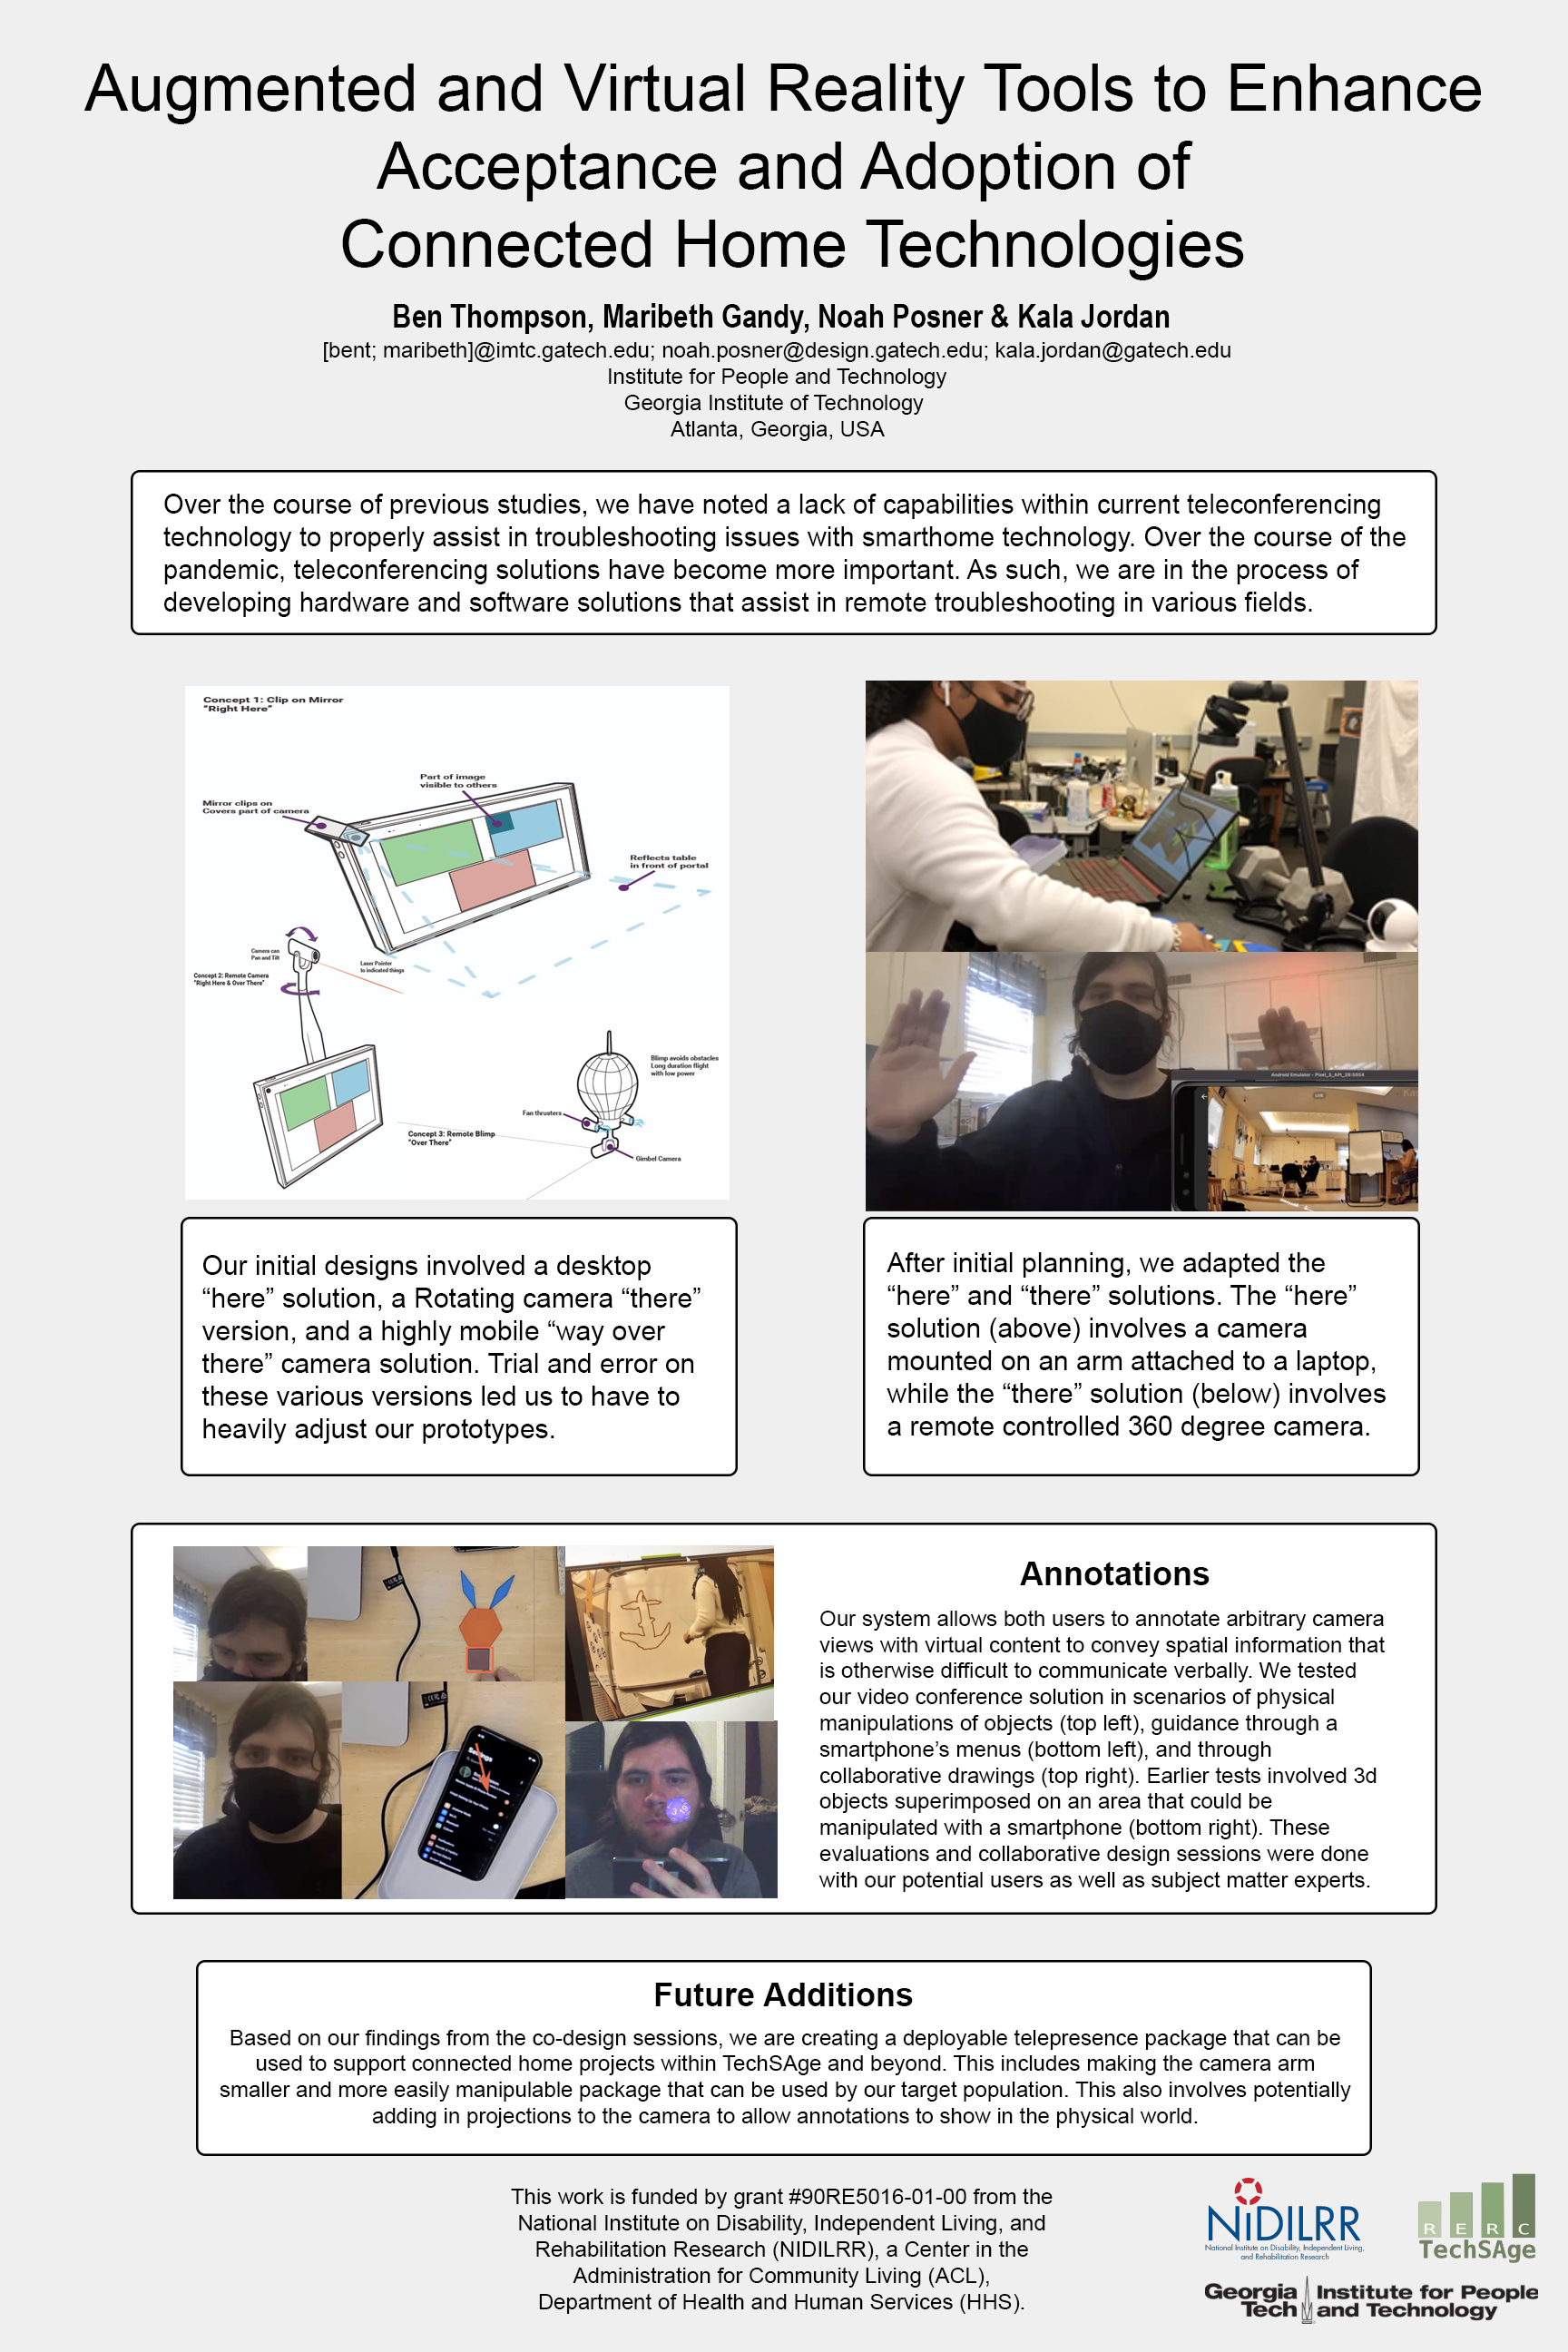 Poster about hardware and software solutions to support remote troubleshooting over telepresence systems